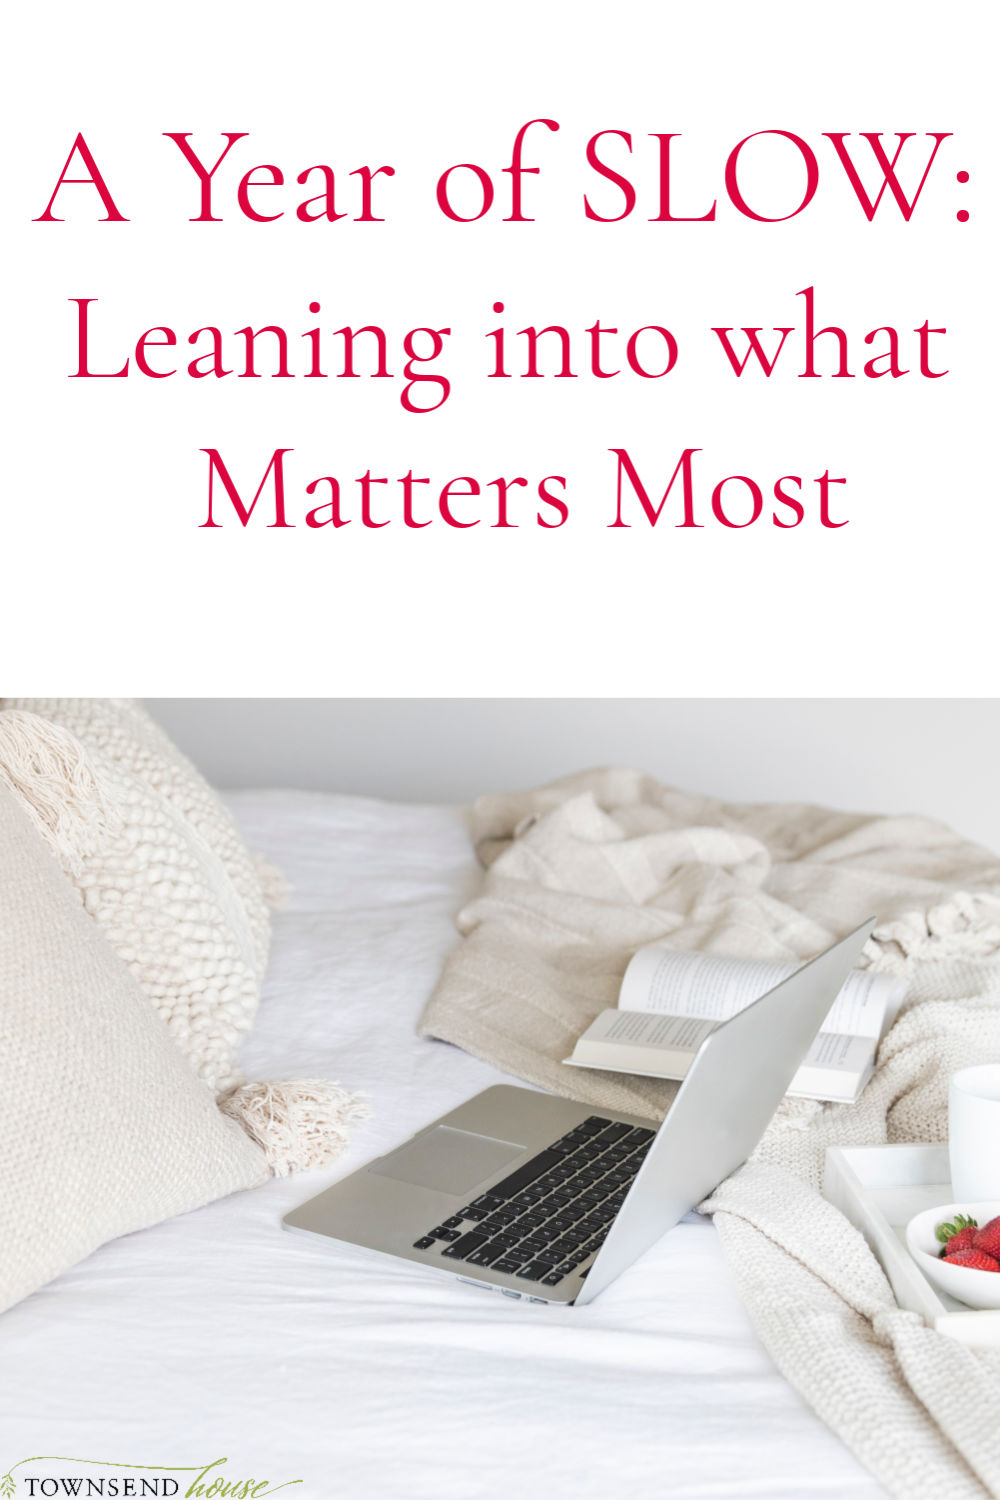 A Year of Slow – Leaning into What Matters Most